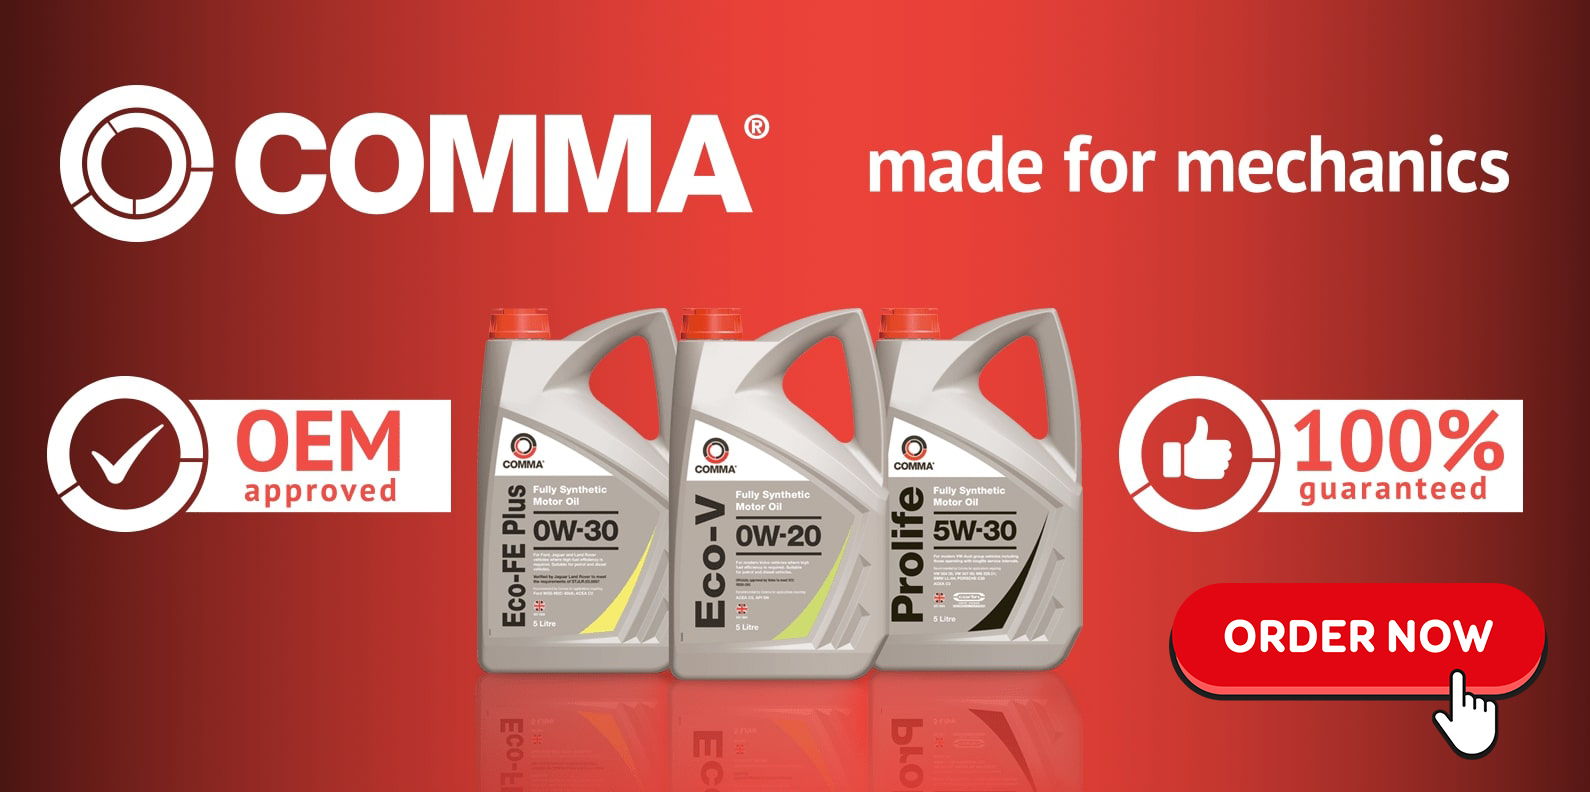 Choose Comma Oil For Your Next Service! Made for Mechanics